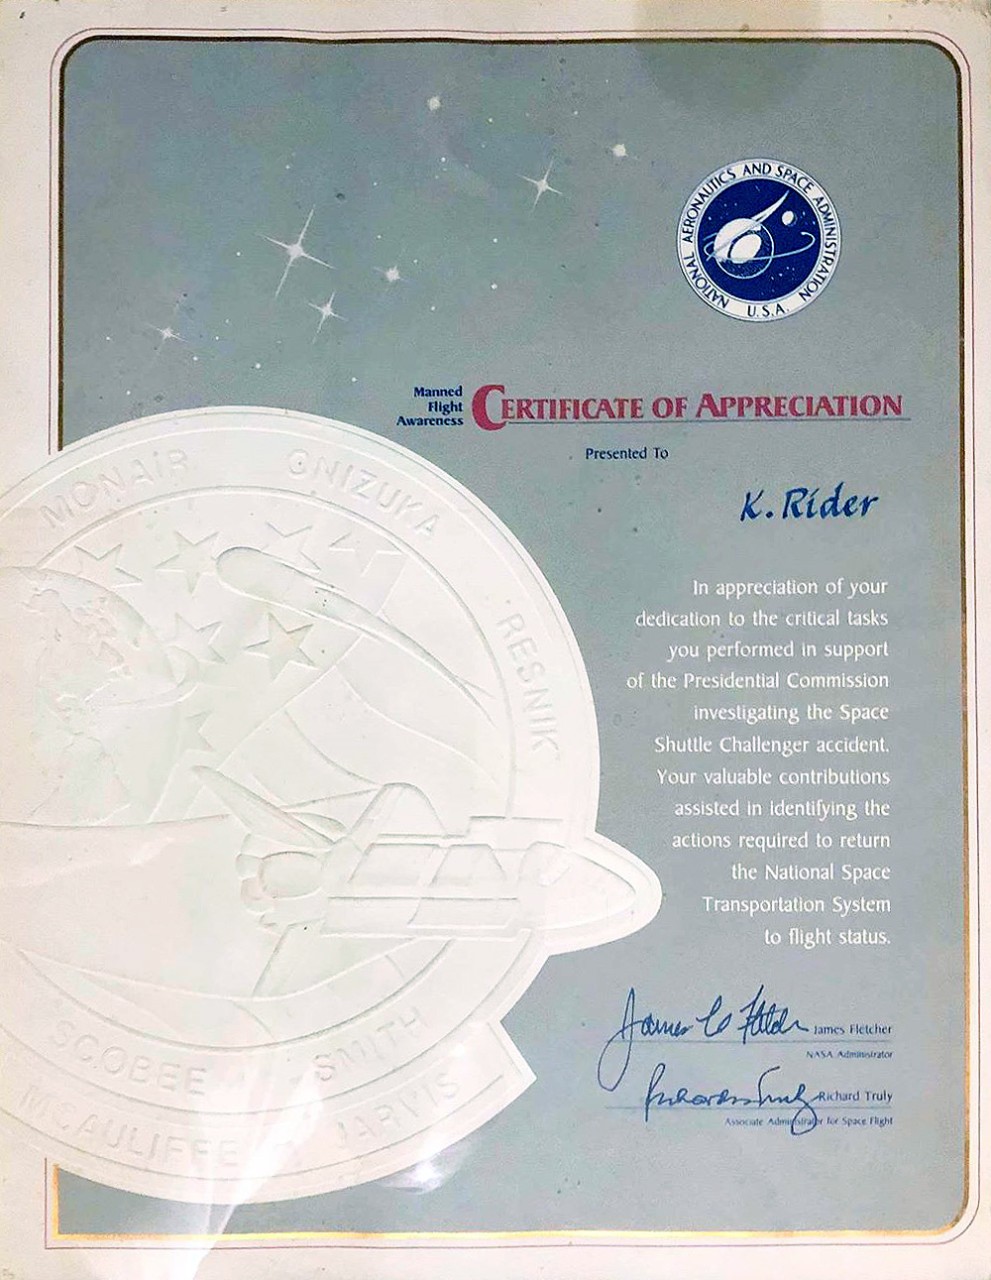 NASA Certificate of Appreciation for Manned Flight Awareness.    For U.S. Navy personnel who partook in the search for Challenger, NASA awarded these certificates which read, “In appreciation of your dedication to the critical tasks you performed in support of the Presidential Commission investigating the Space Shuttle Challenger accident.  Your valuable contributions assisted in identifying the actions required to return the National Space Transportation System to flight status.”  Signed by Mr. James Fletcher, NASA Administrator and Mr. Richard Truly, Associate Administrator for Space Flight.  The names of the Challenger crewmembers are on the insignia to the left.   Courtesy of Mr. Kevin Rider, crewmember of USS Dewey (DDG-45), whose ship partook in the initial search operation. 